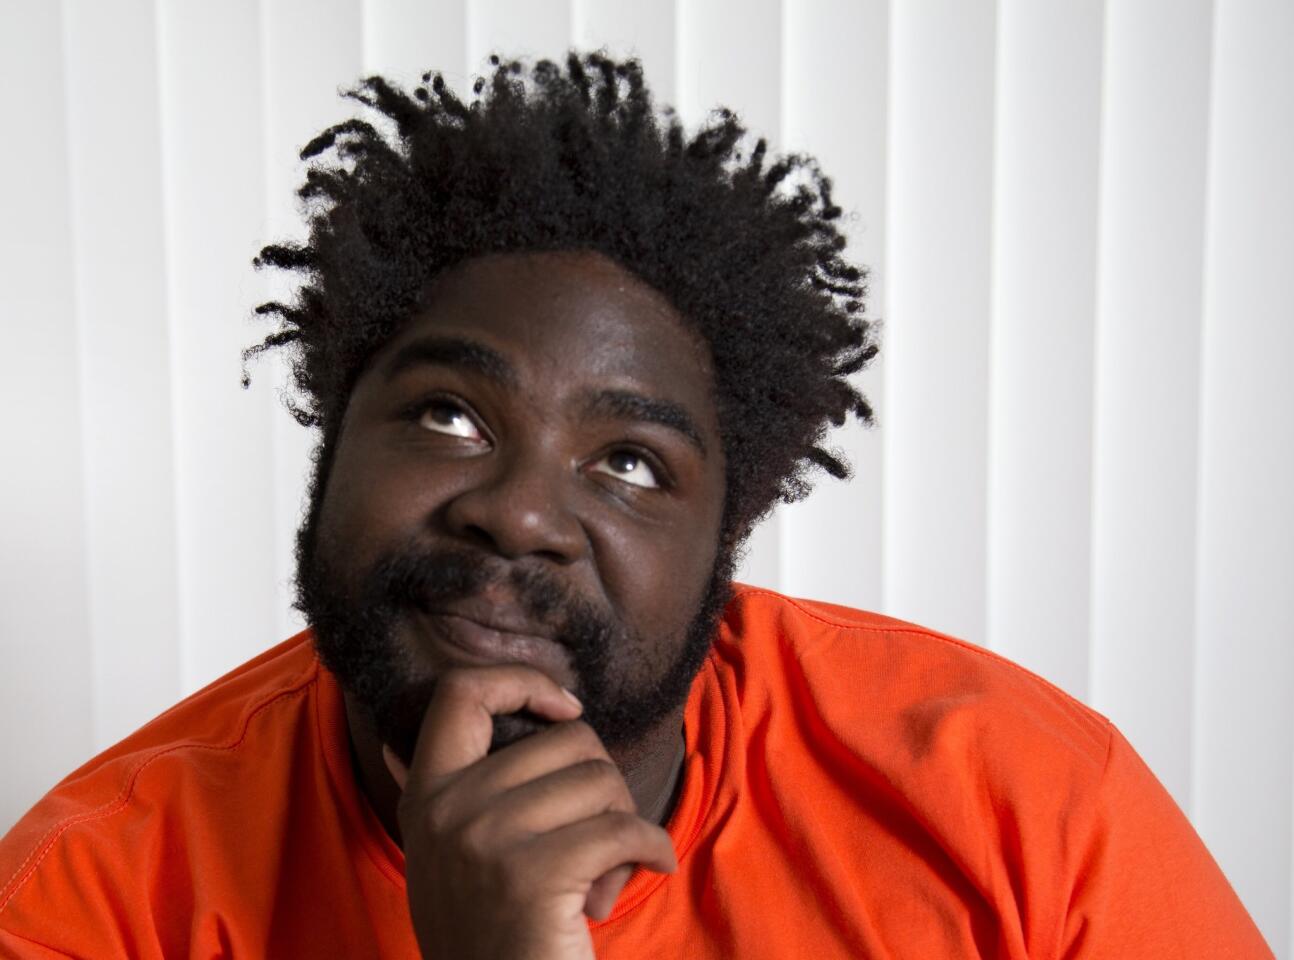 Comedian Ron Funches at his home in Glendale